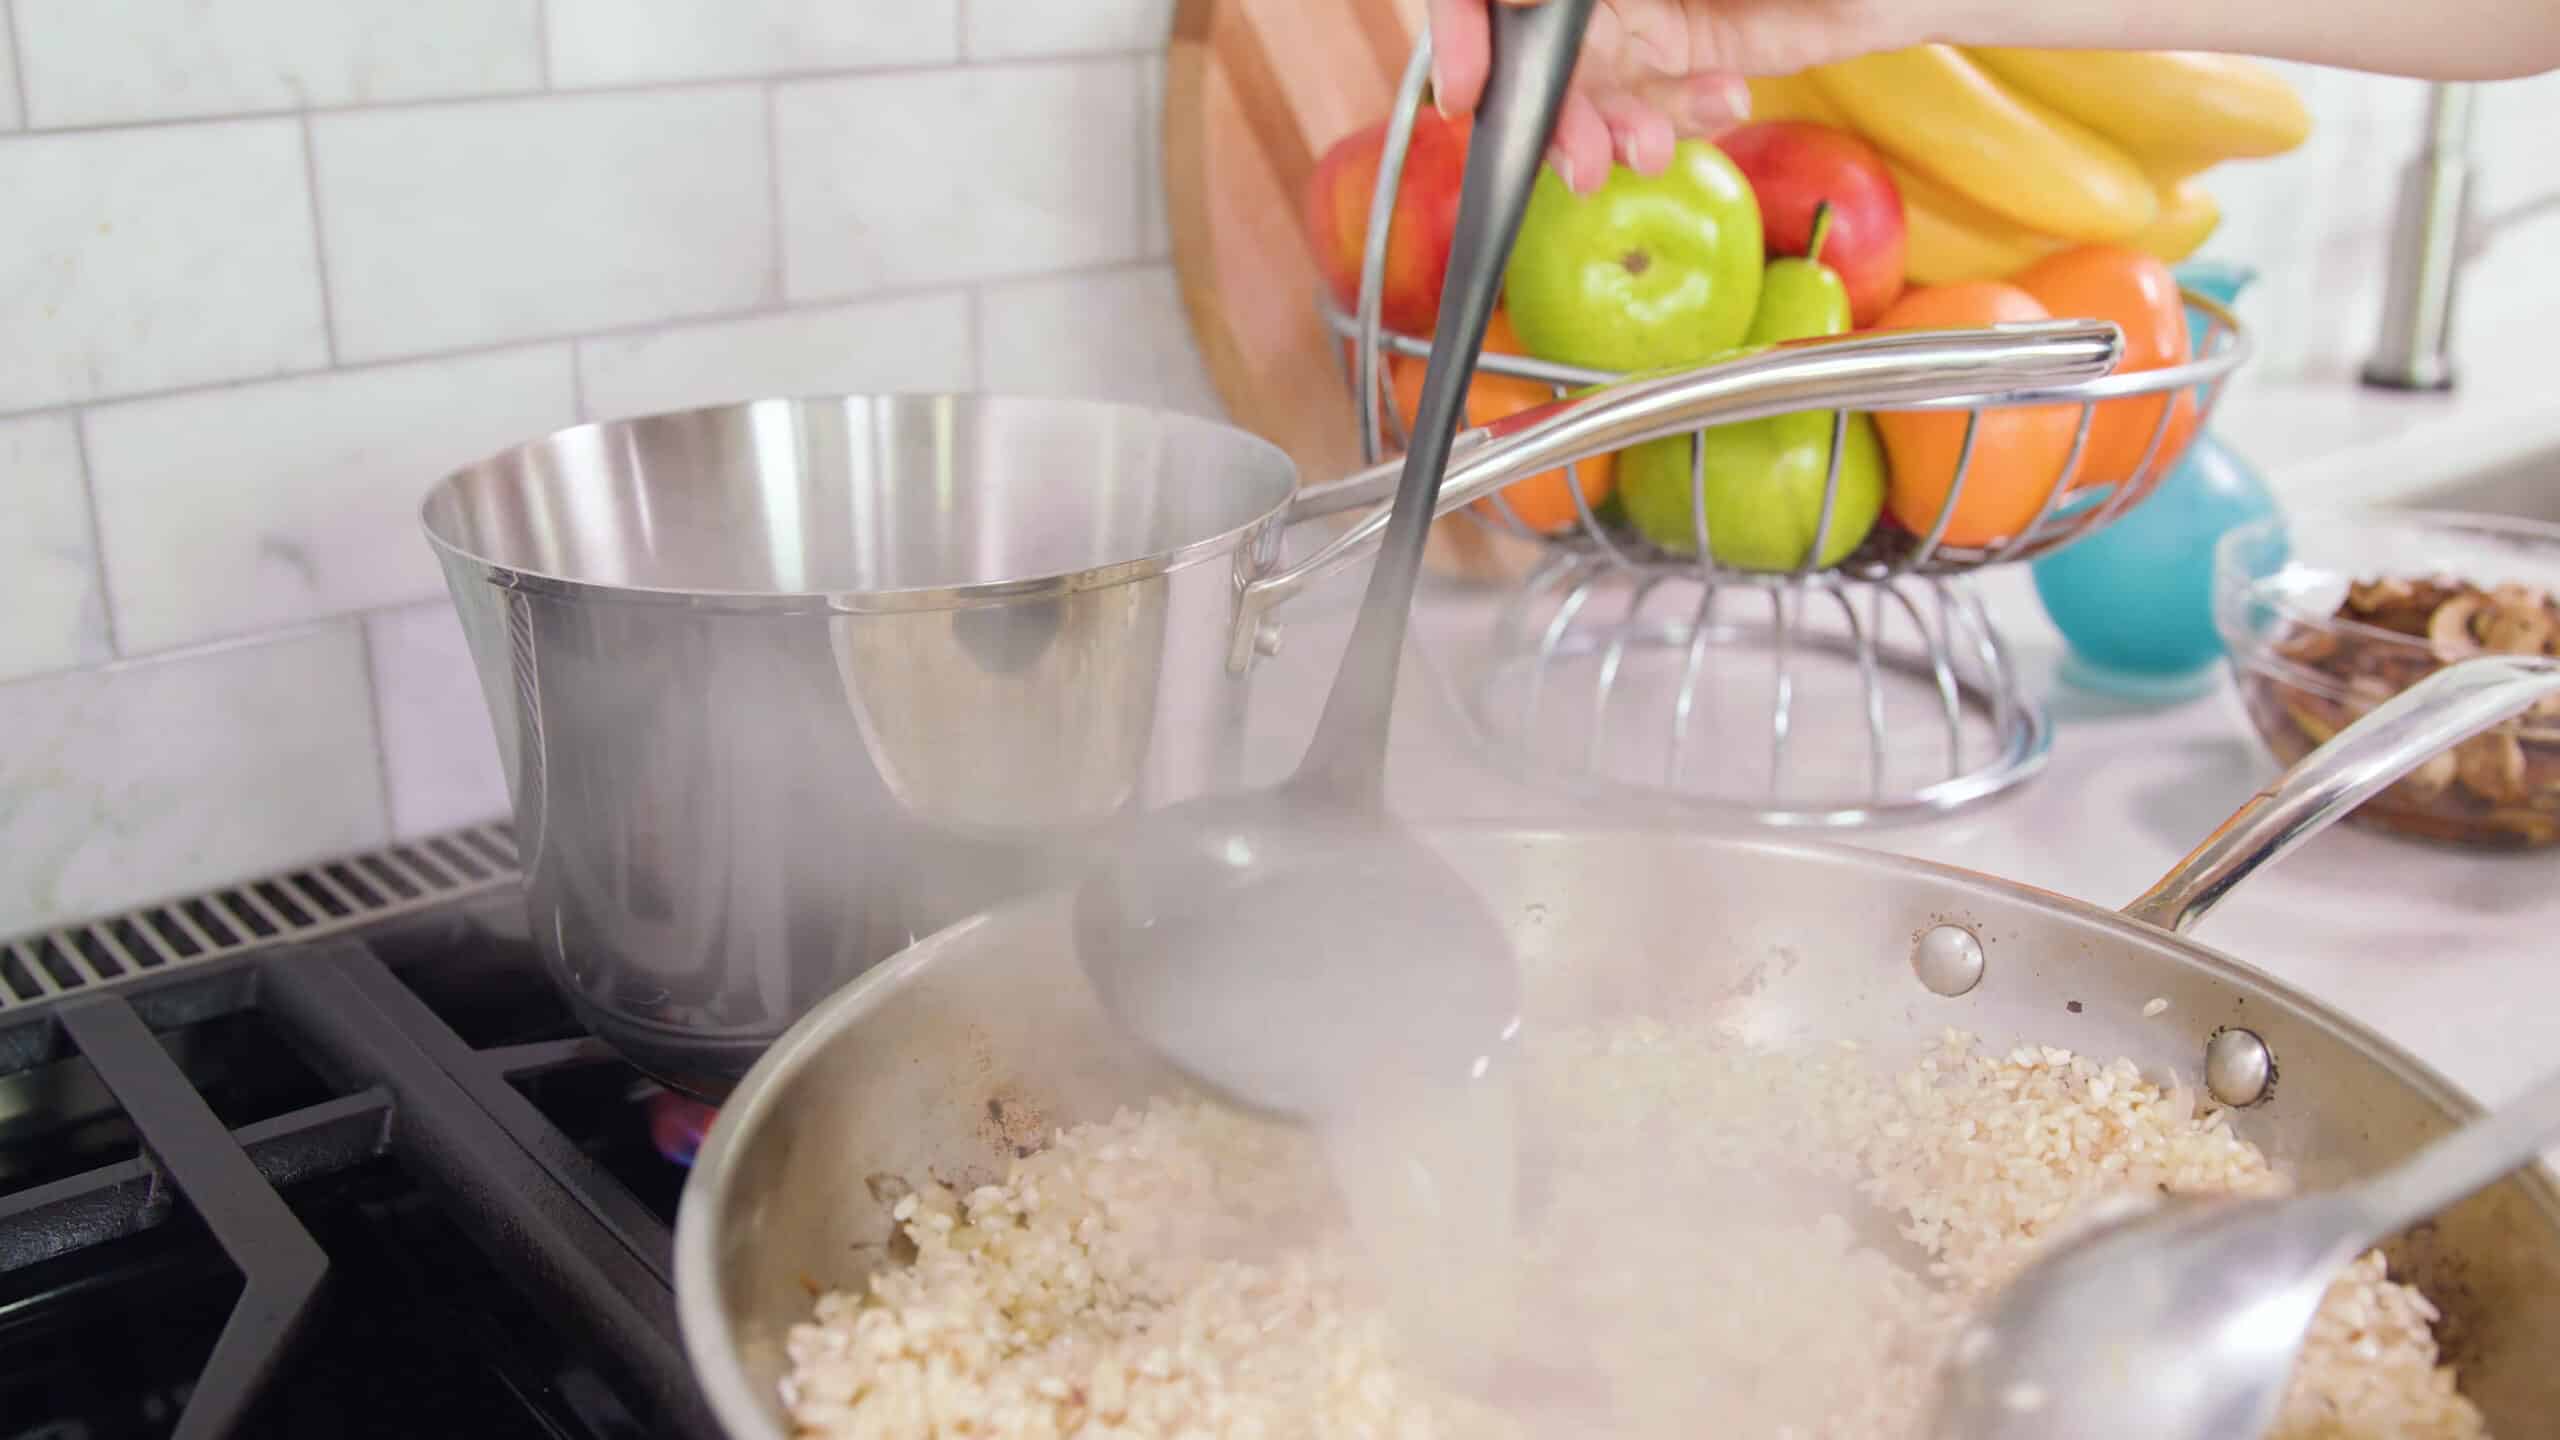 A silver saucepan on a stovetop with risotto and a ladle adding chicken stock to the saucepan from a silver pot.